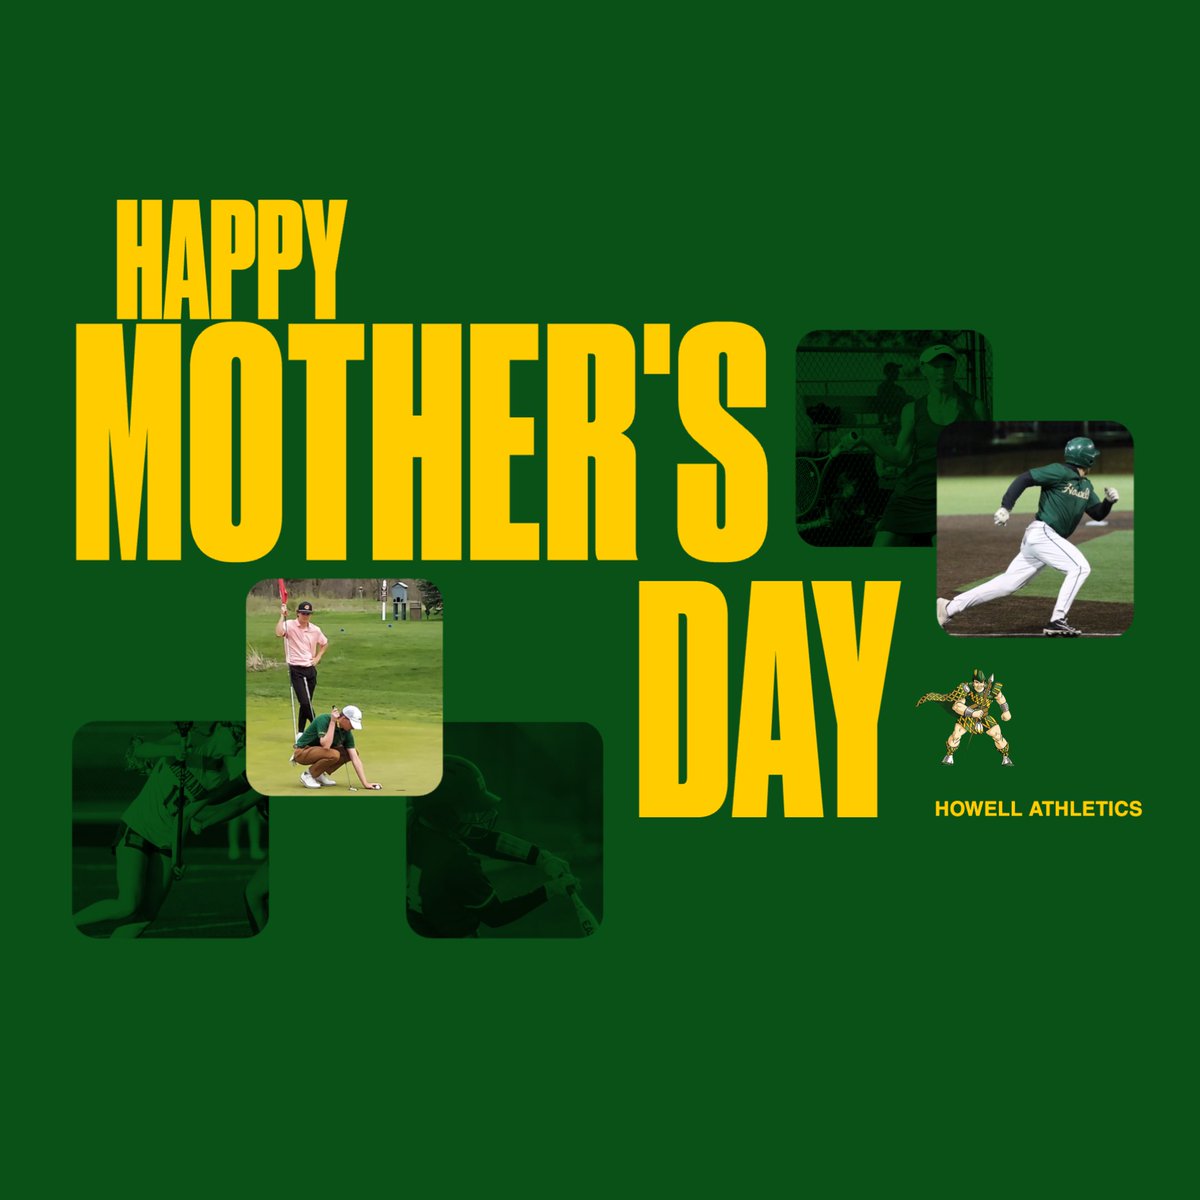 Happy Mother's Day to all the Highlander sports moms! Your dedication and support are truly appreciated. Thank you for all you do! #OneHowell